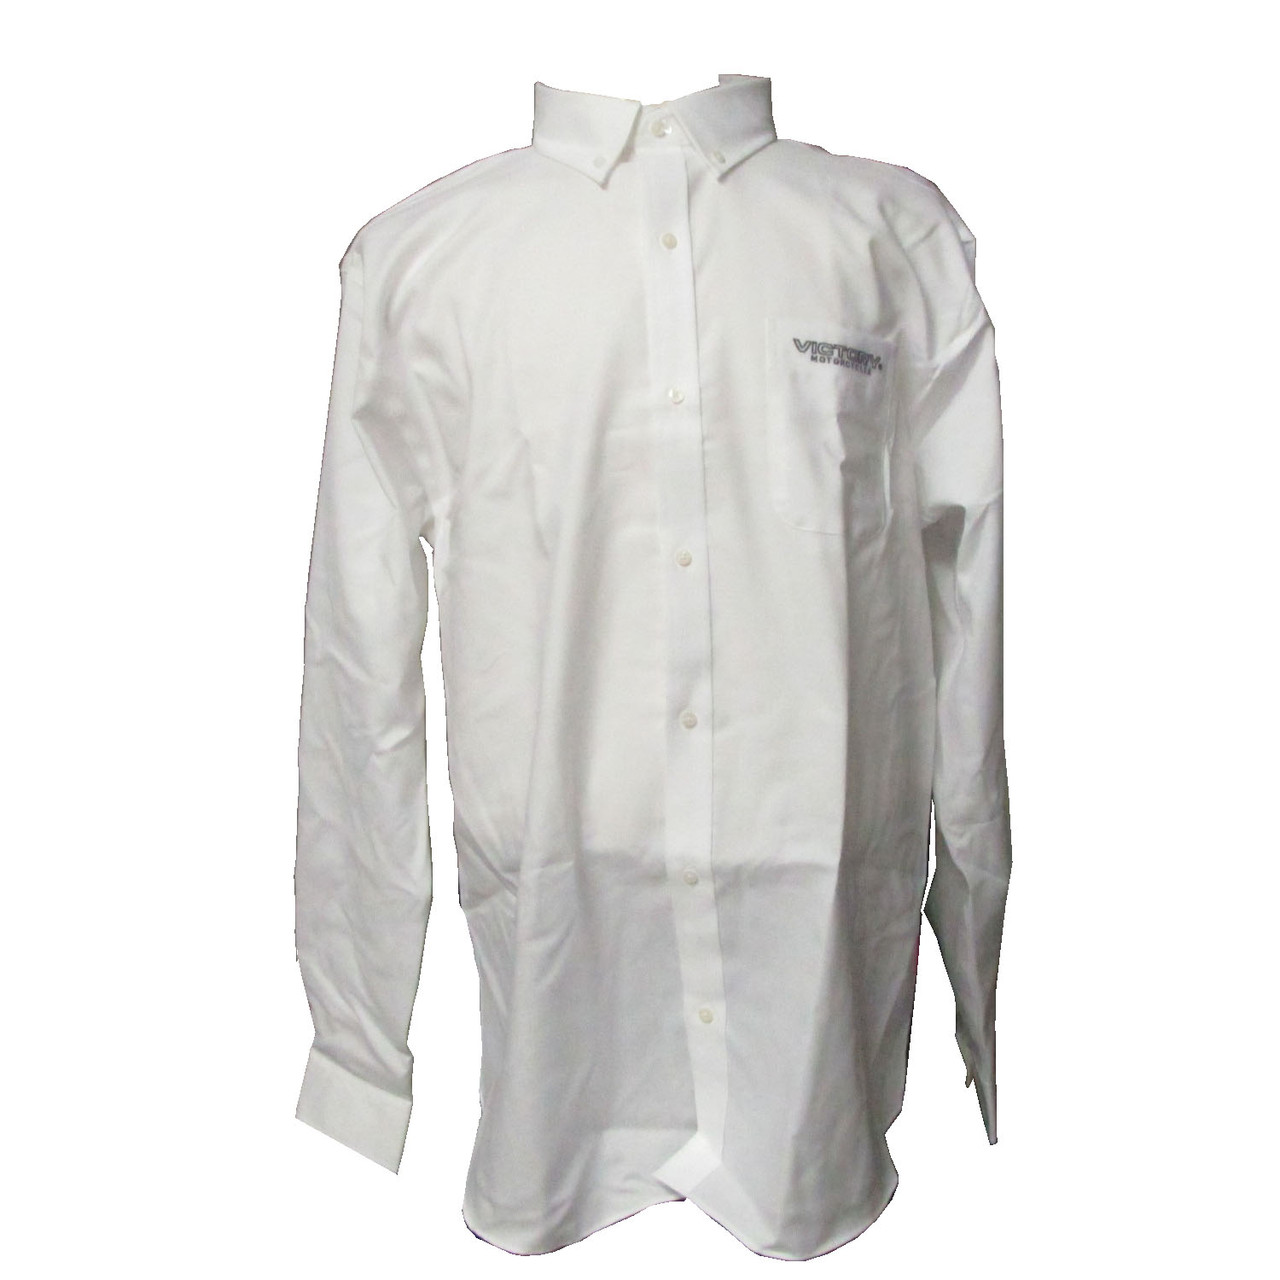 Victory Motorcycle New OEM Men's White Corp Shirt, Small, 286440202